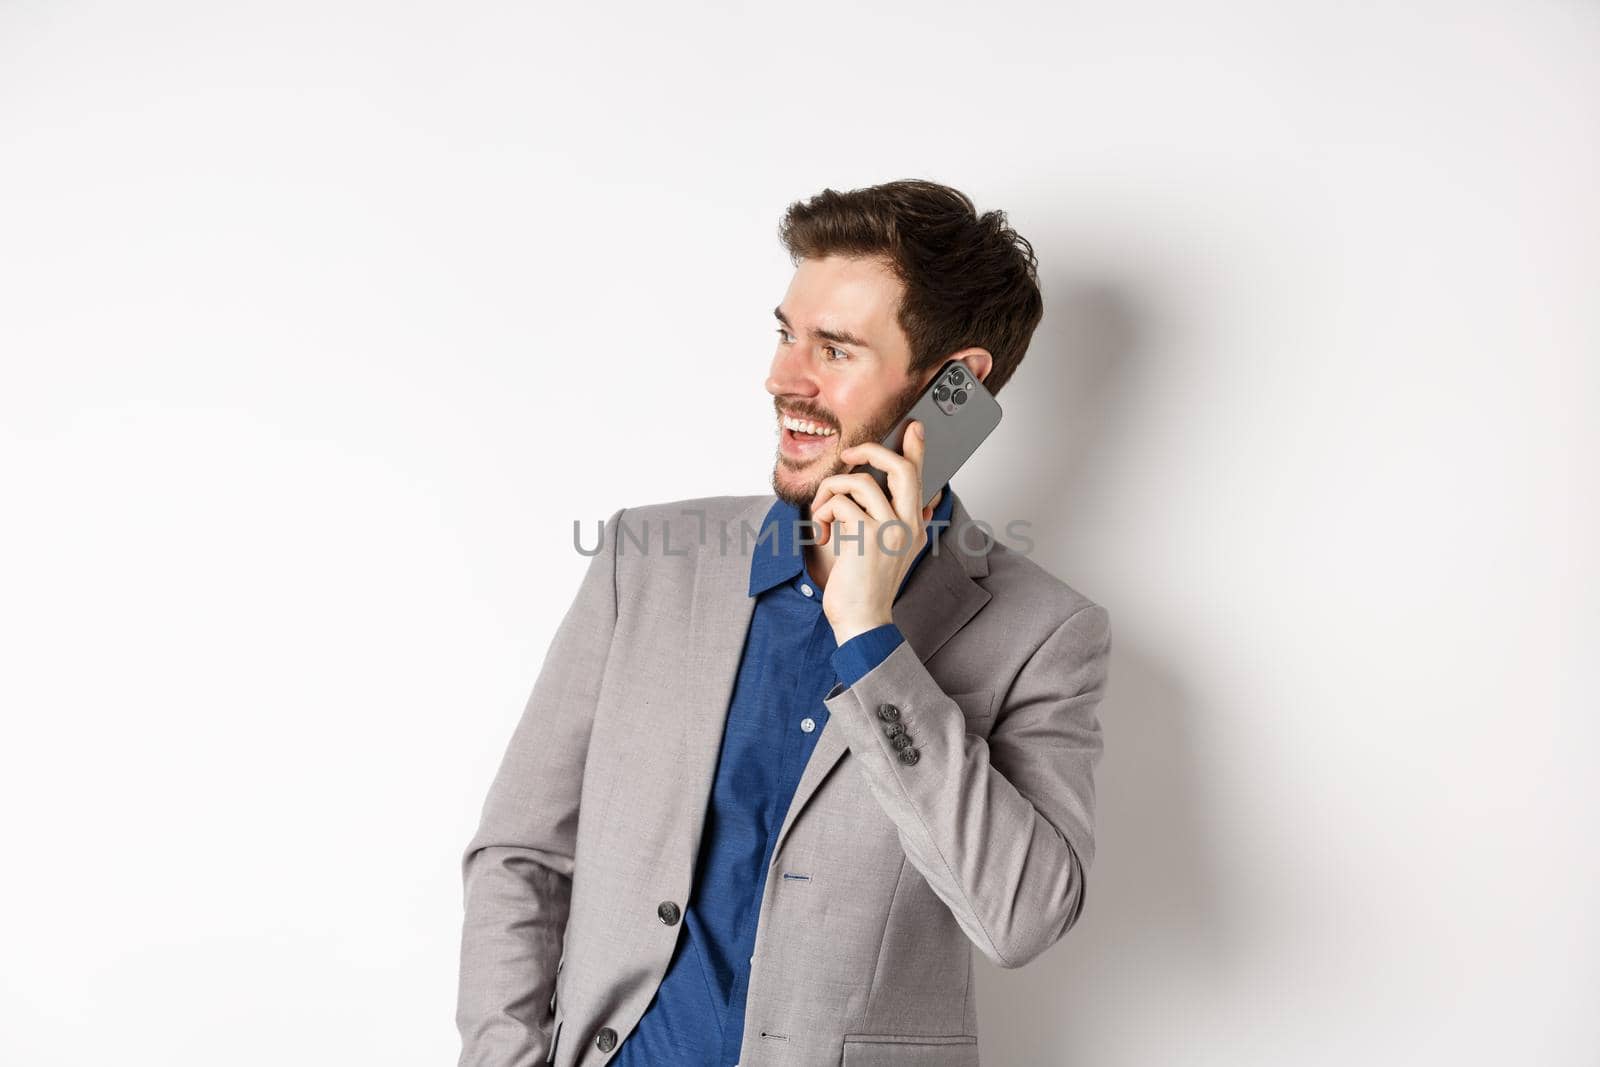 Happy businessman laughing and smiling, talking on mobile phone, holding hand in pocket and looking aside at empty space with cheerful face, white background.